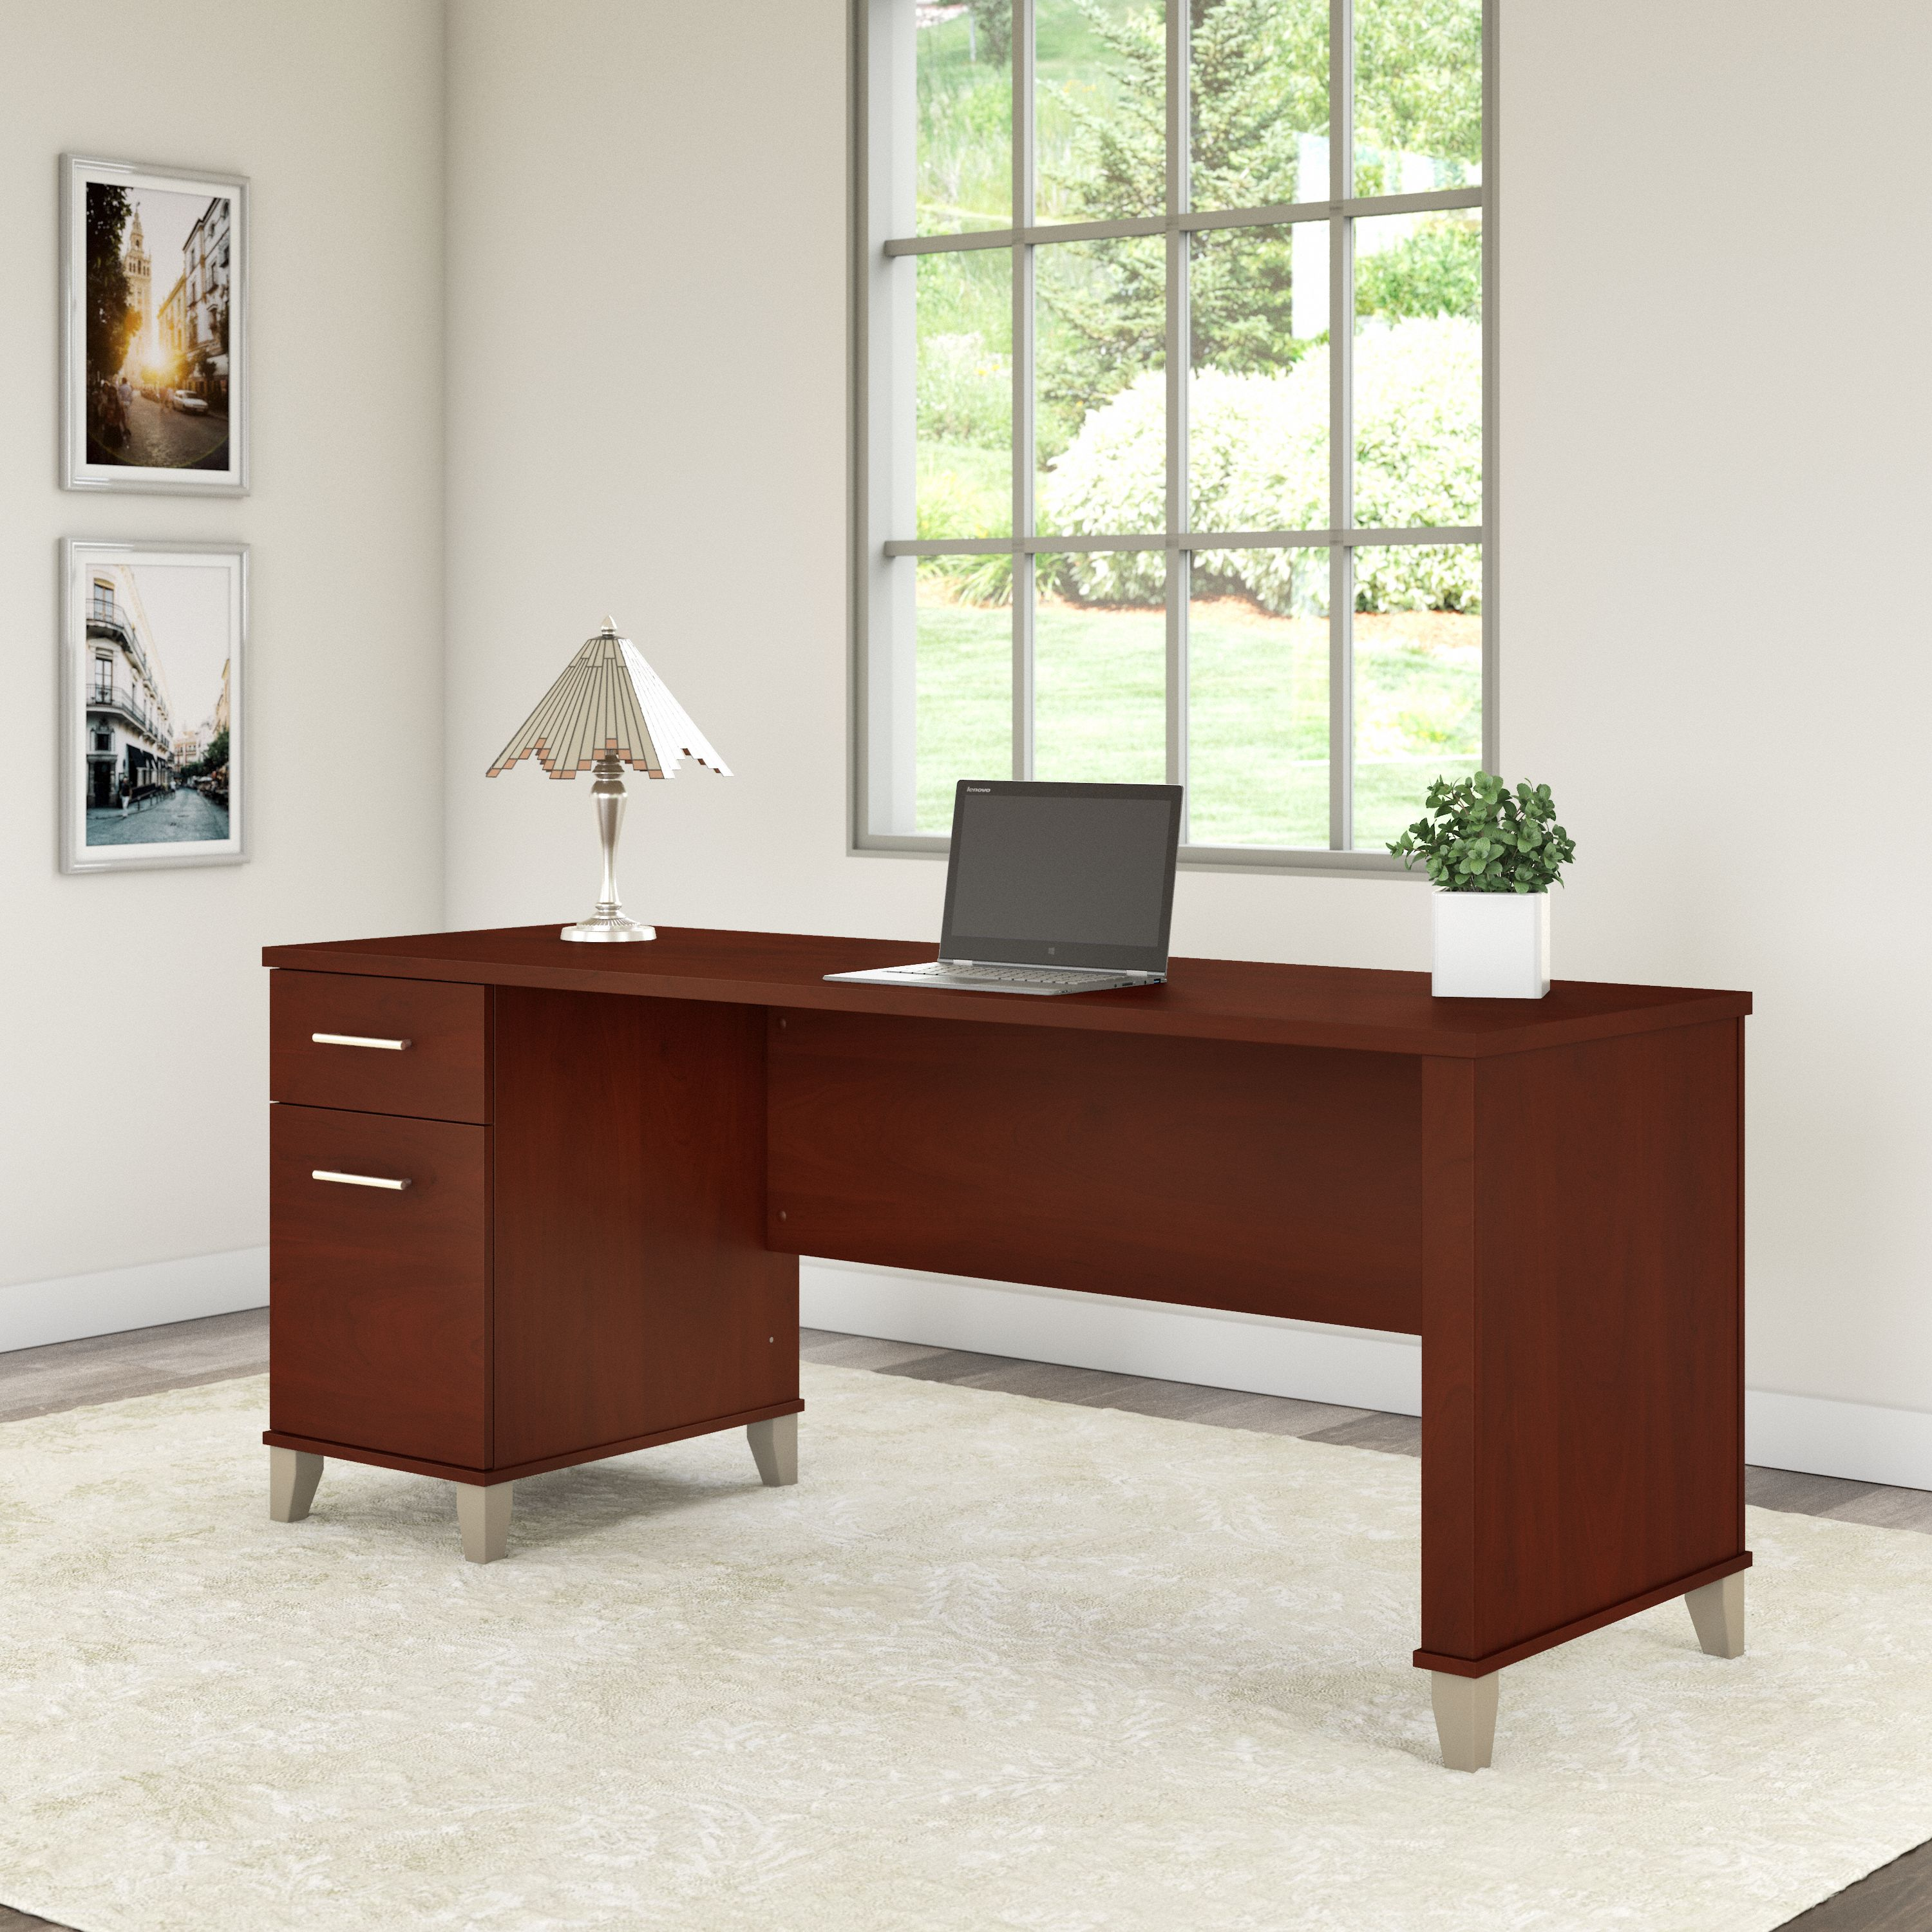 Shop Bush Furniture Somerset 72W Office Desk with Drawers 01 WC81772 #color_hansen cherry